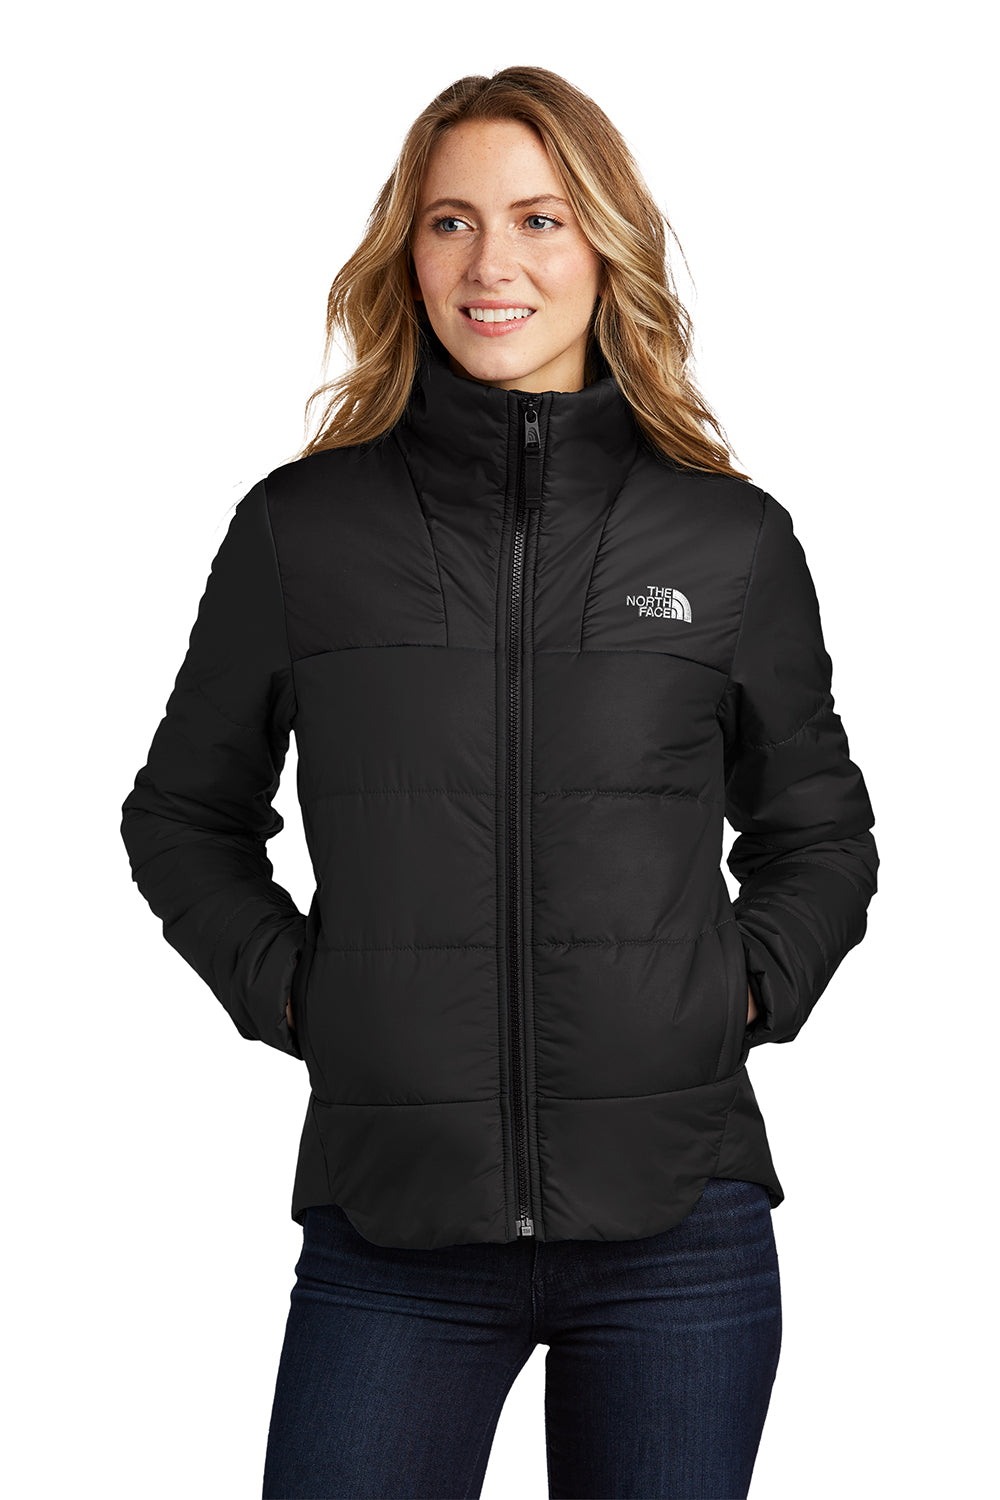 The North Face NF0A7V6K Womens Everyday Insulated Full Zip Jacket Black Front